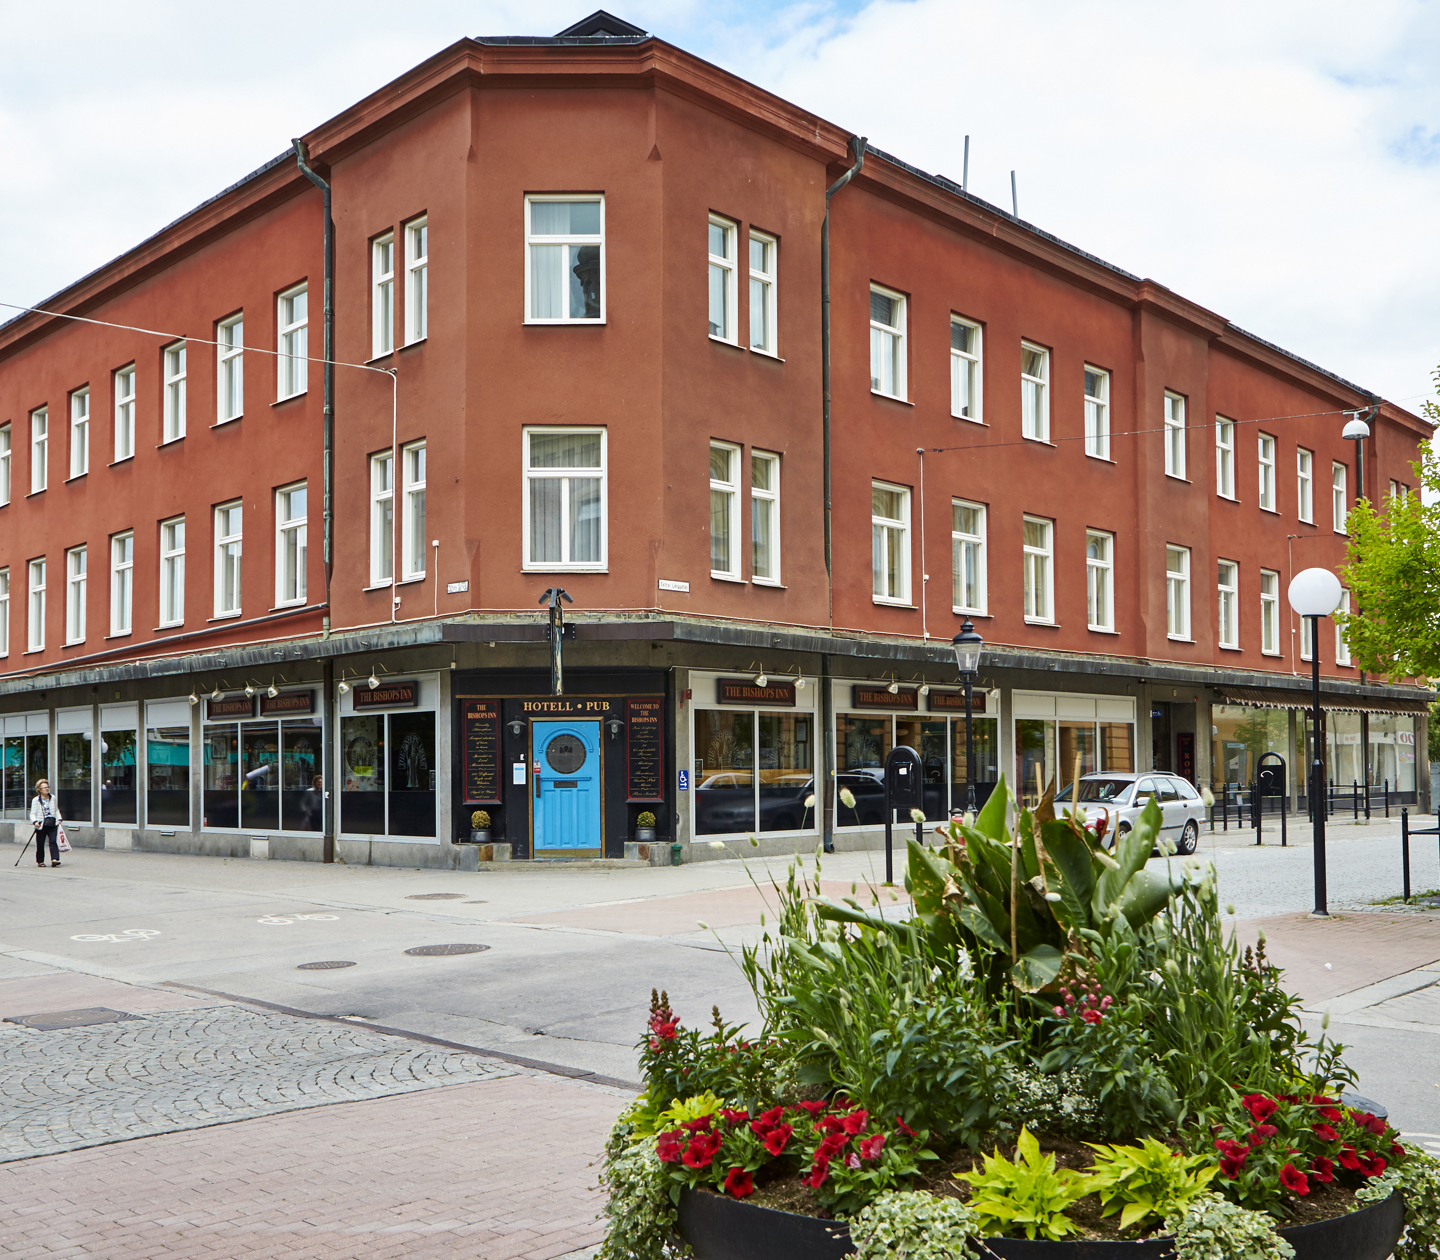 The facade of Hotel Bishops Arms in Kristianstad